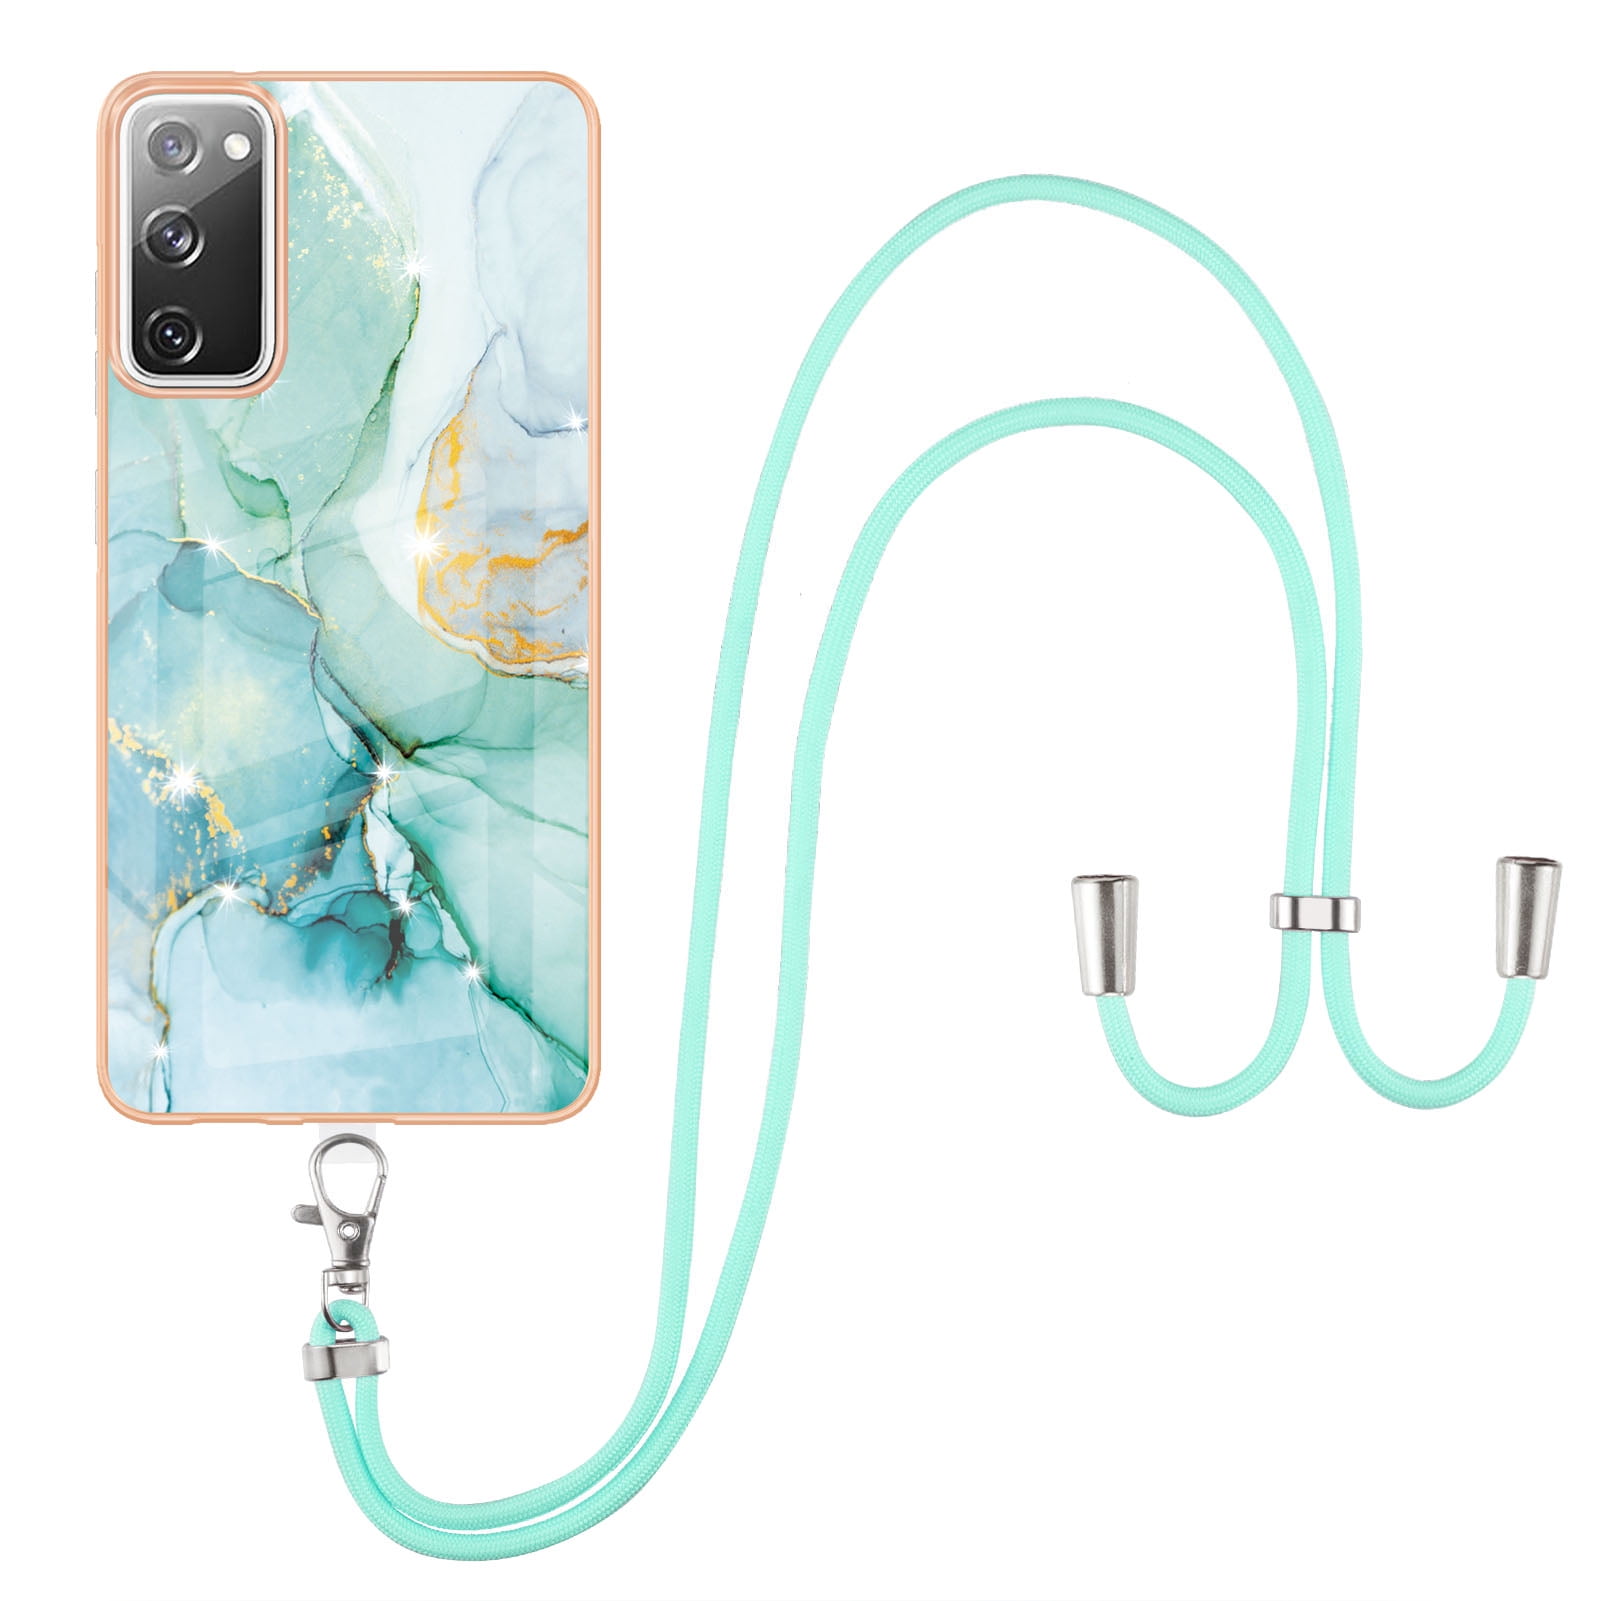 Galaxy S20 FE Case, Galaxy S20 Lite Case, Allytech Luxury Marble Rubber TPU  Drop Protection Anti-scratch Lanyard Back Cover for Girls Women Case for  Samsung Galaxy S20FE / S20 Lite, White 